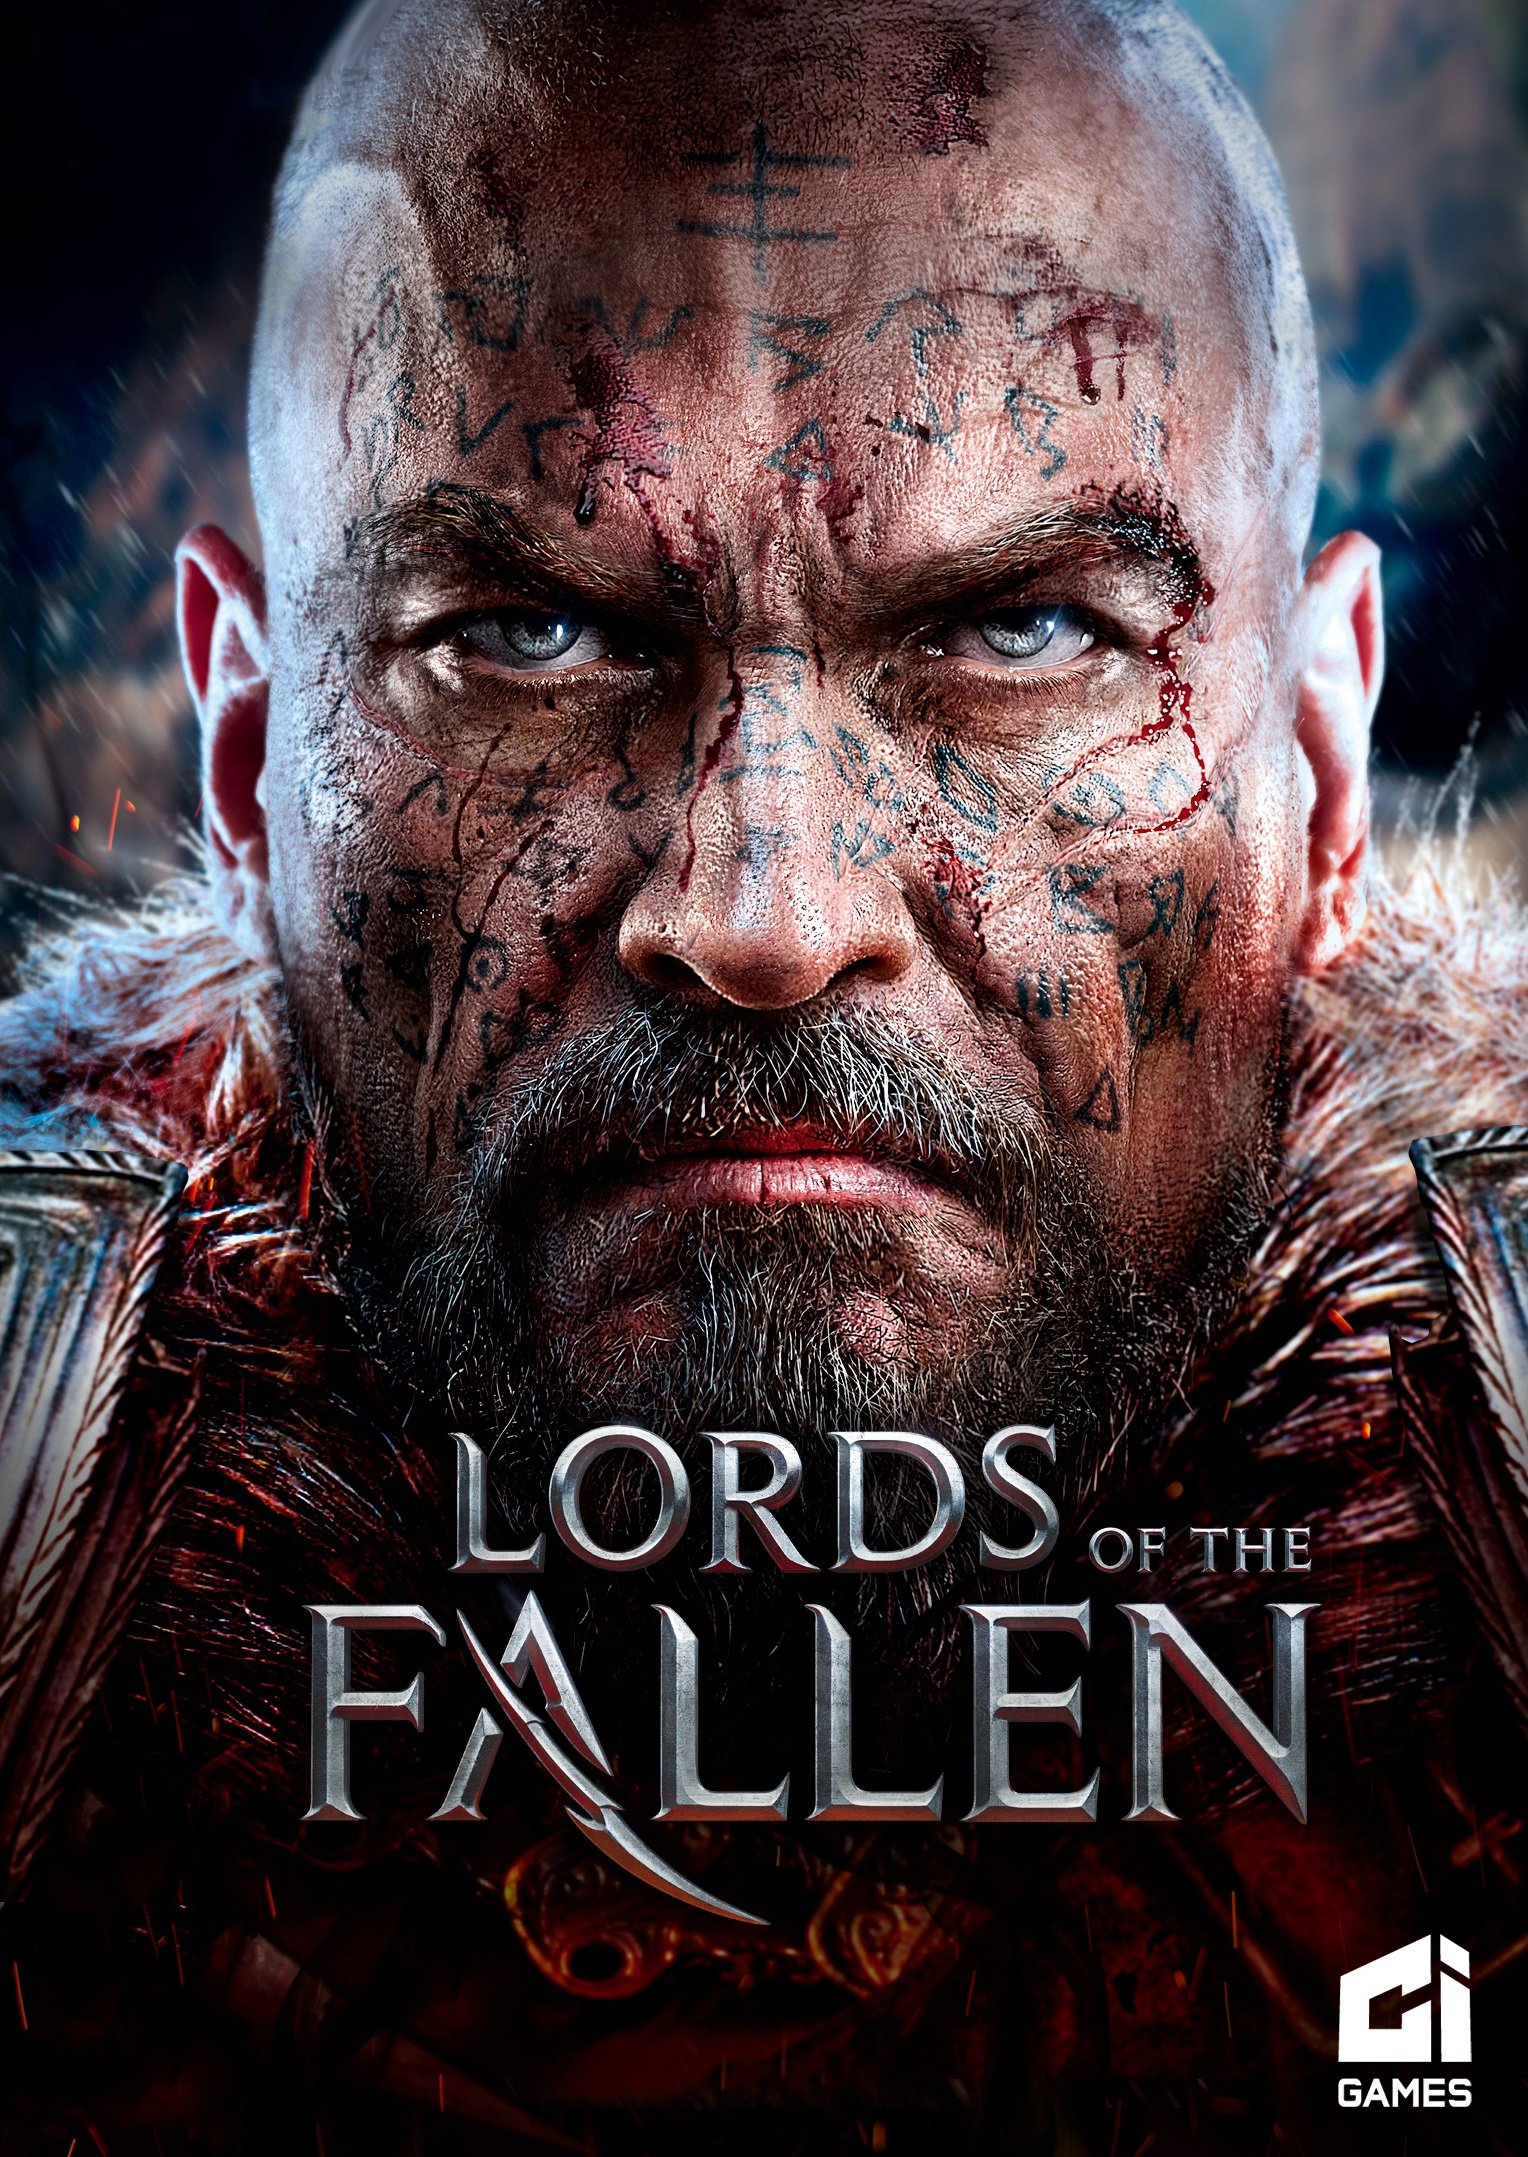 Image of Lords of the Fallen